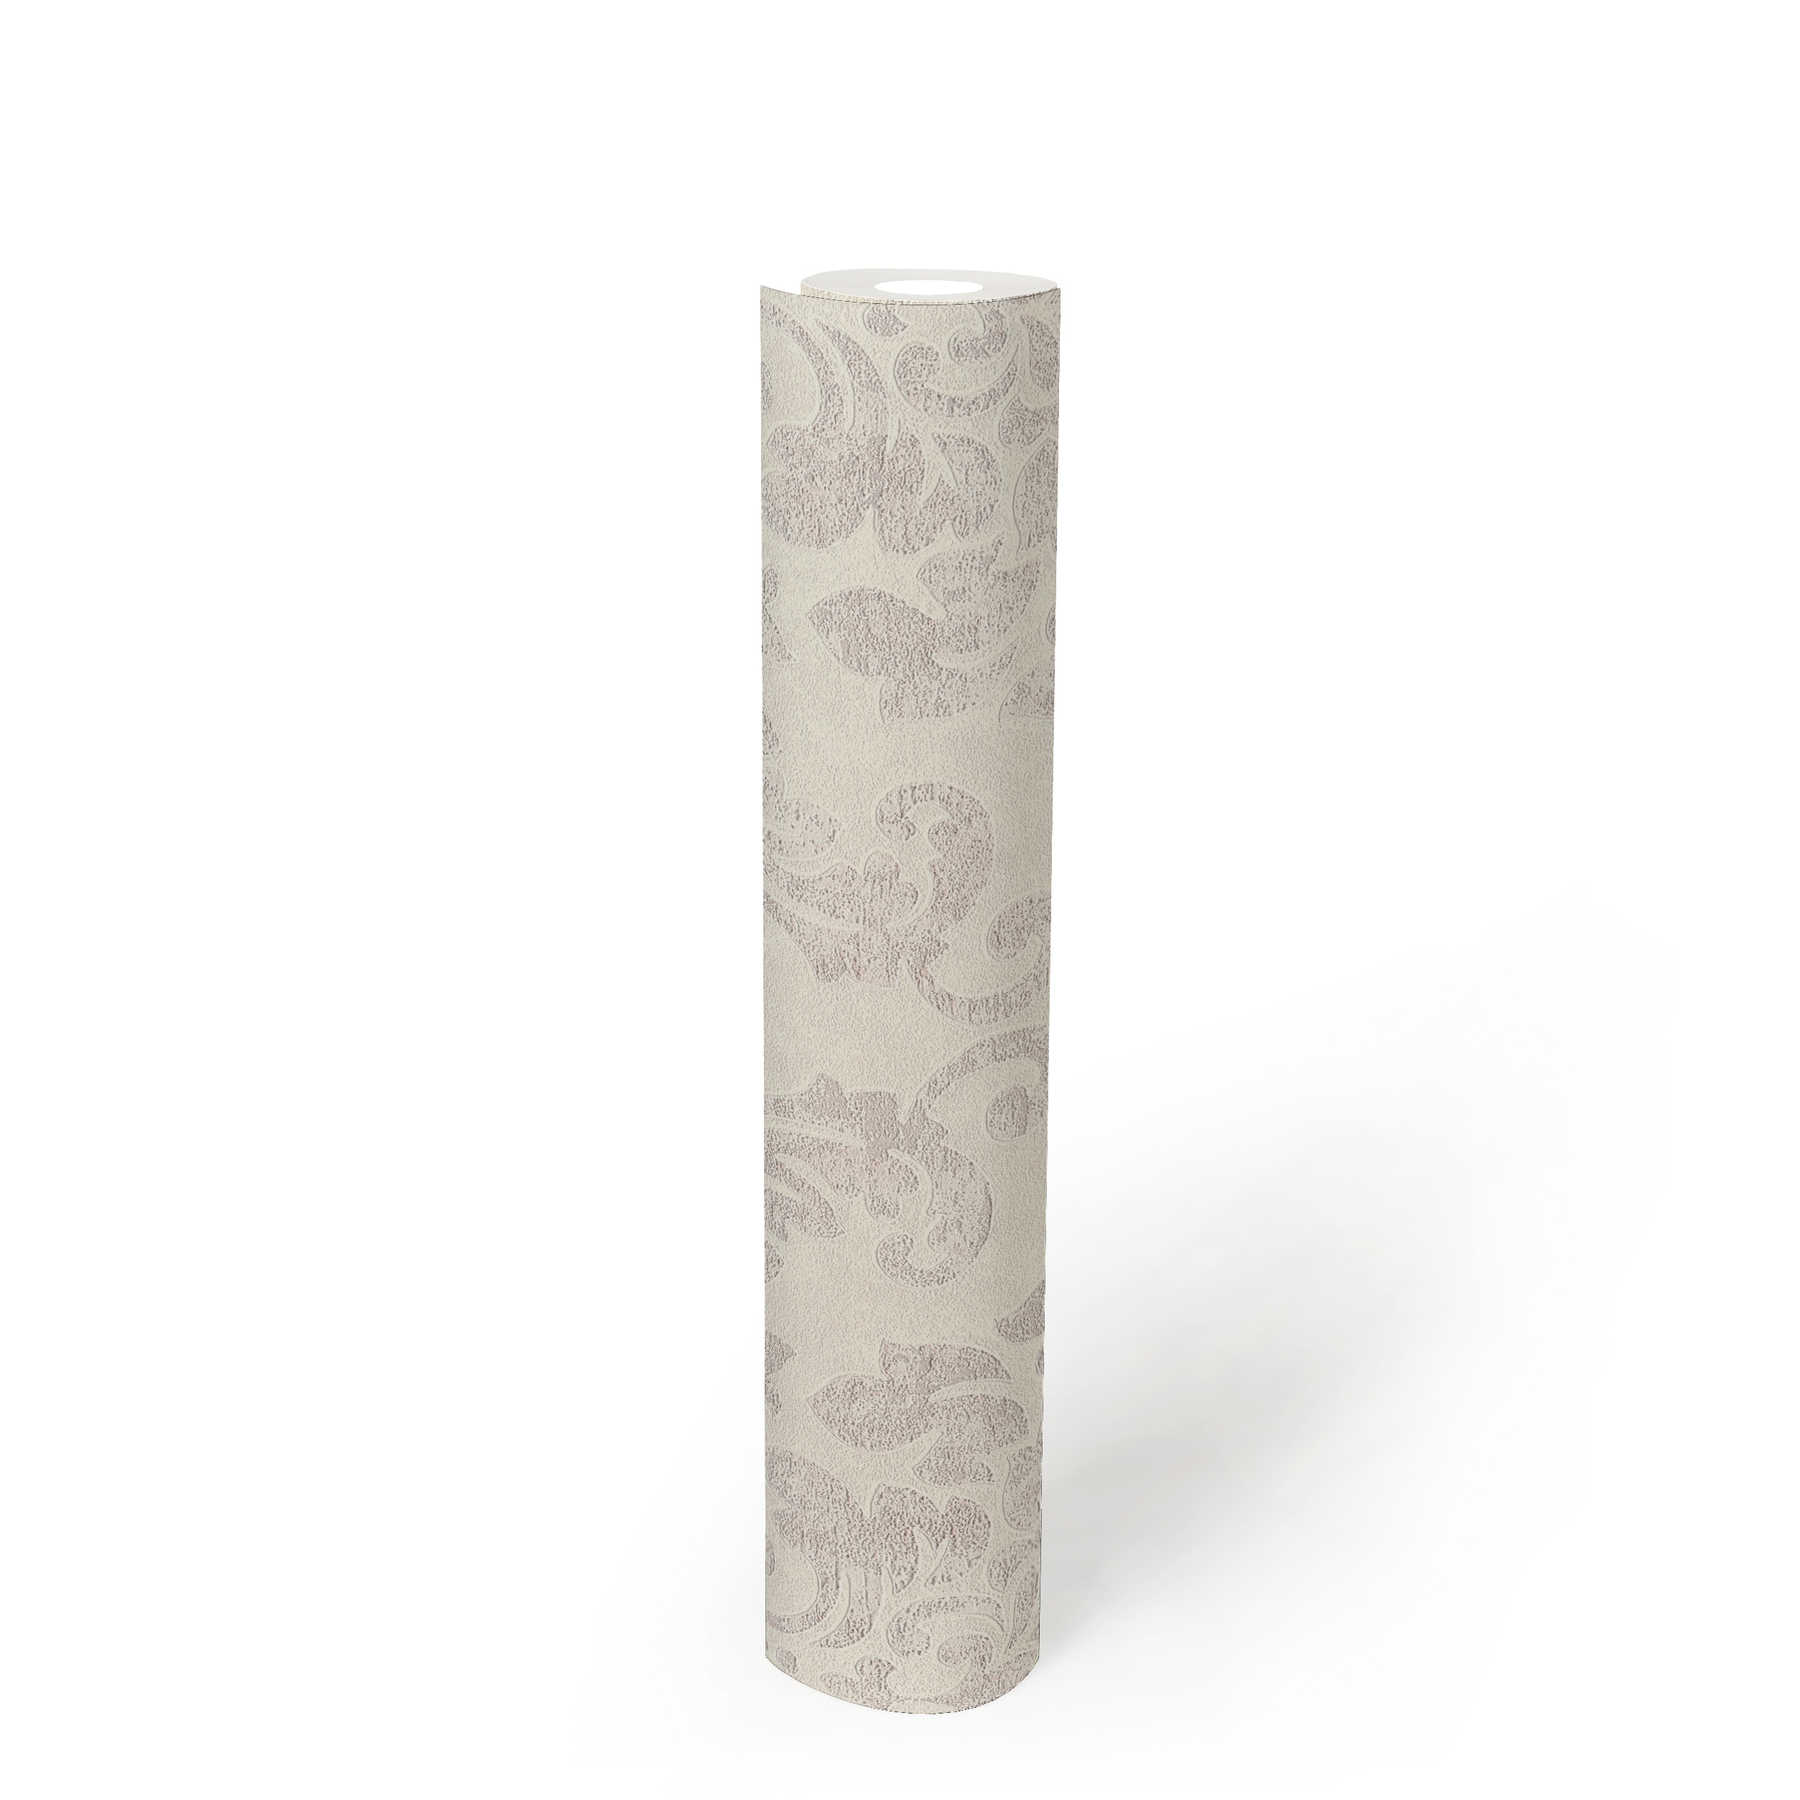             Baroque wallpaper ornaments in used look - white, grey, pink
        